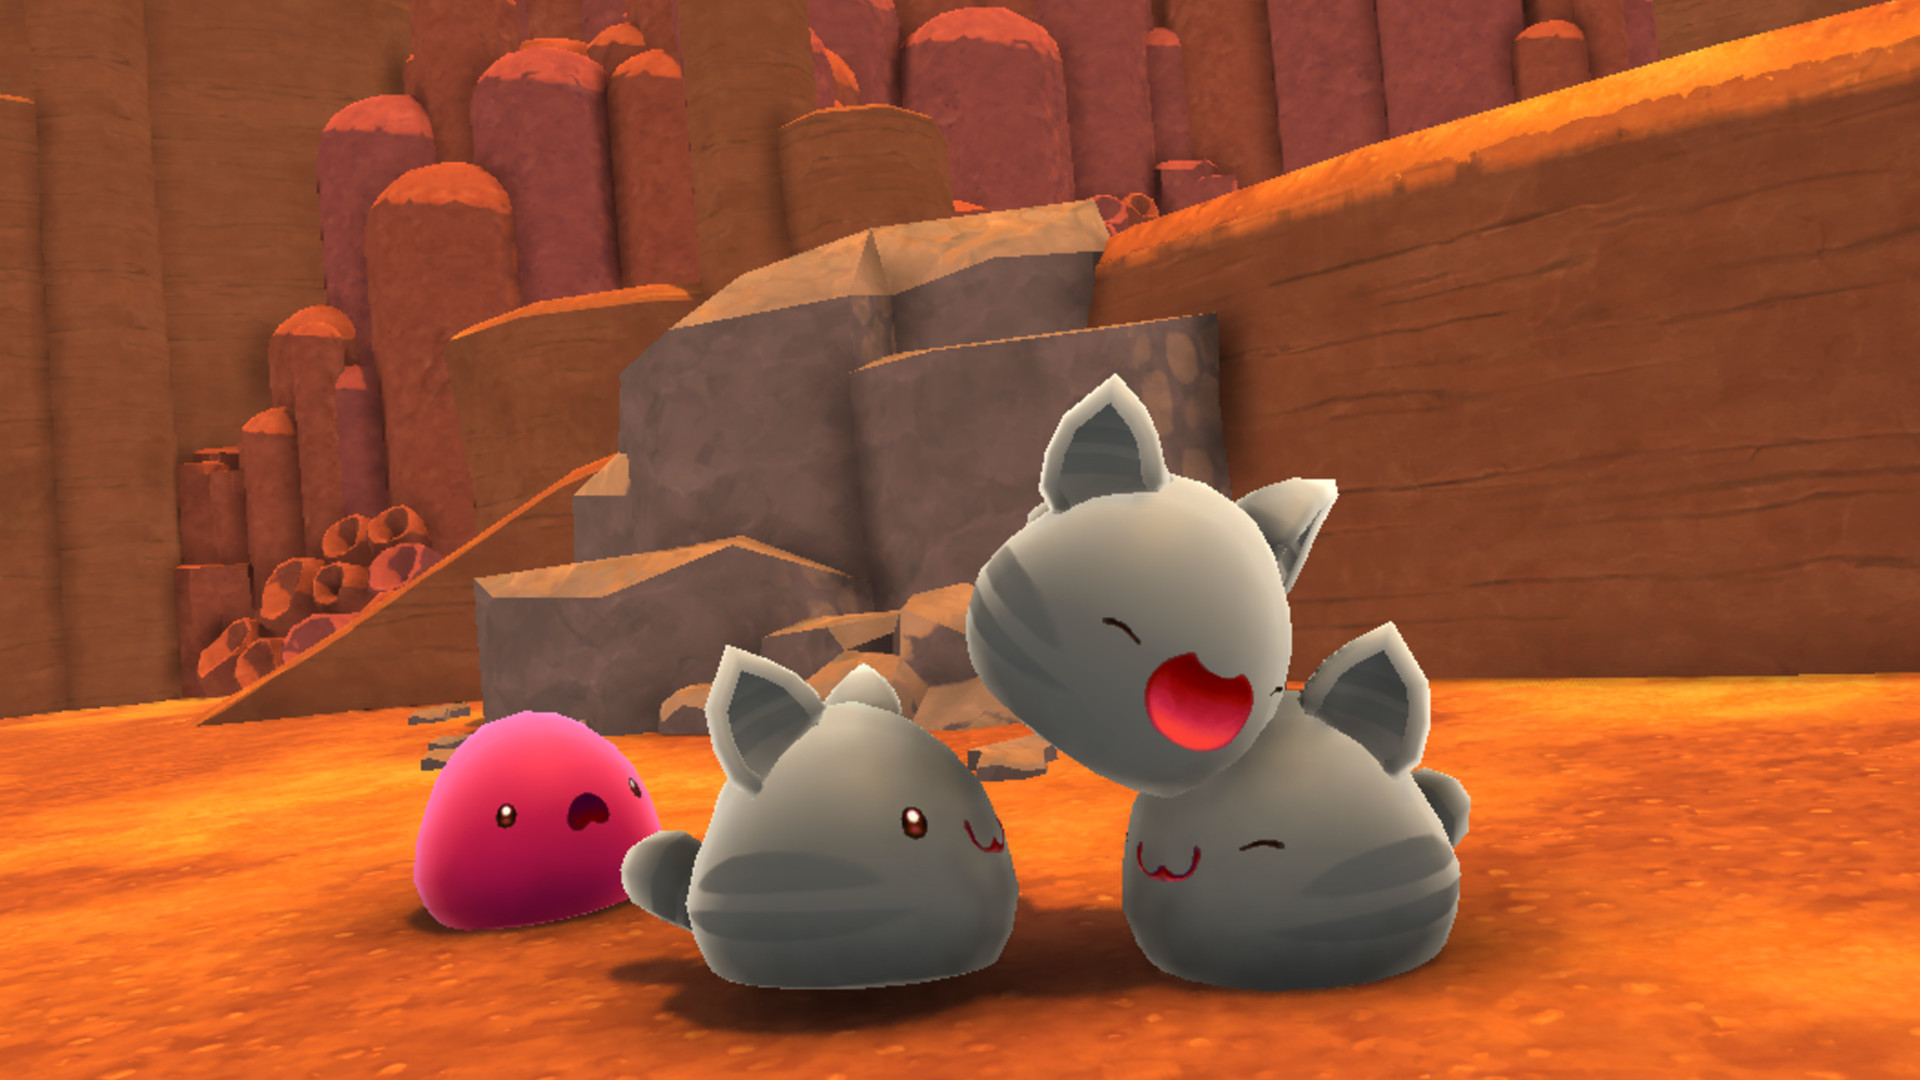 Slime Rancher Is A Very Cute Game About Ranching Slimes